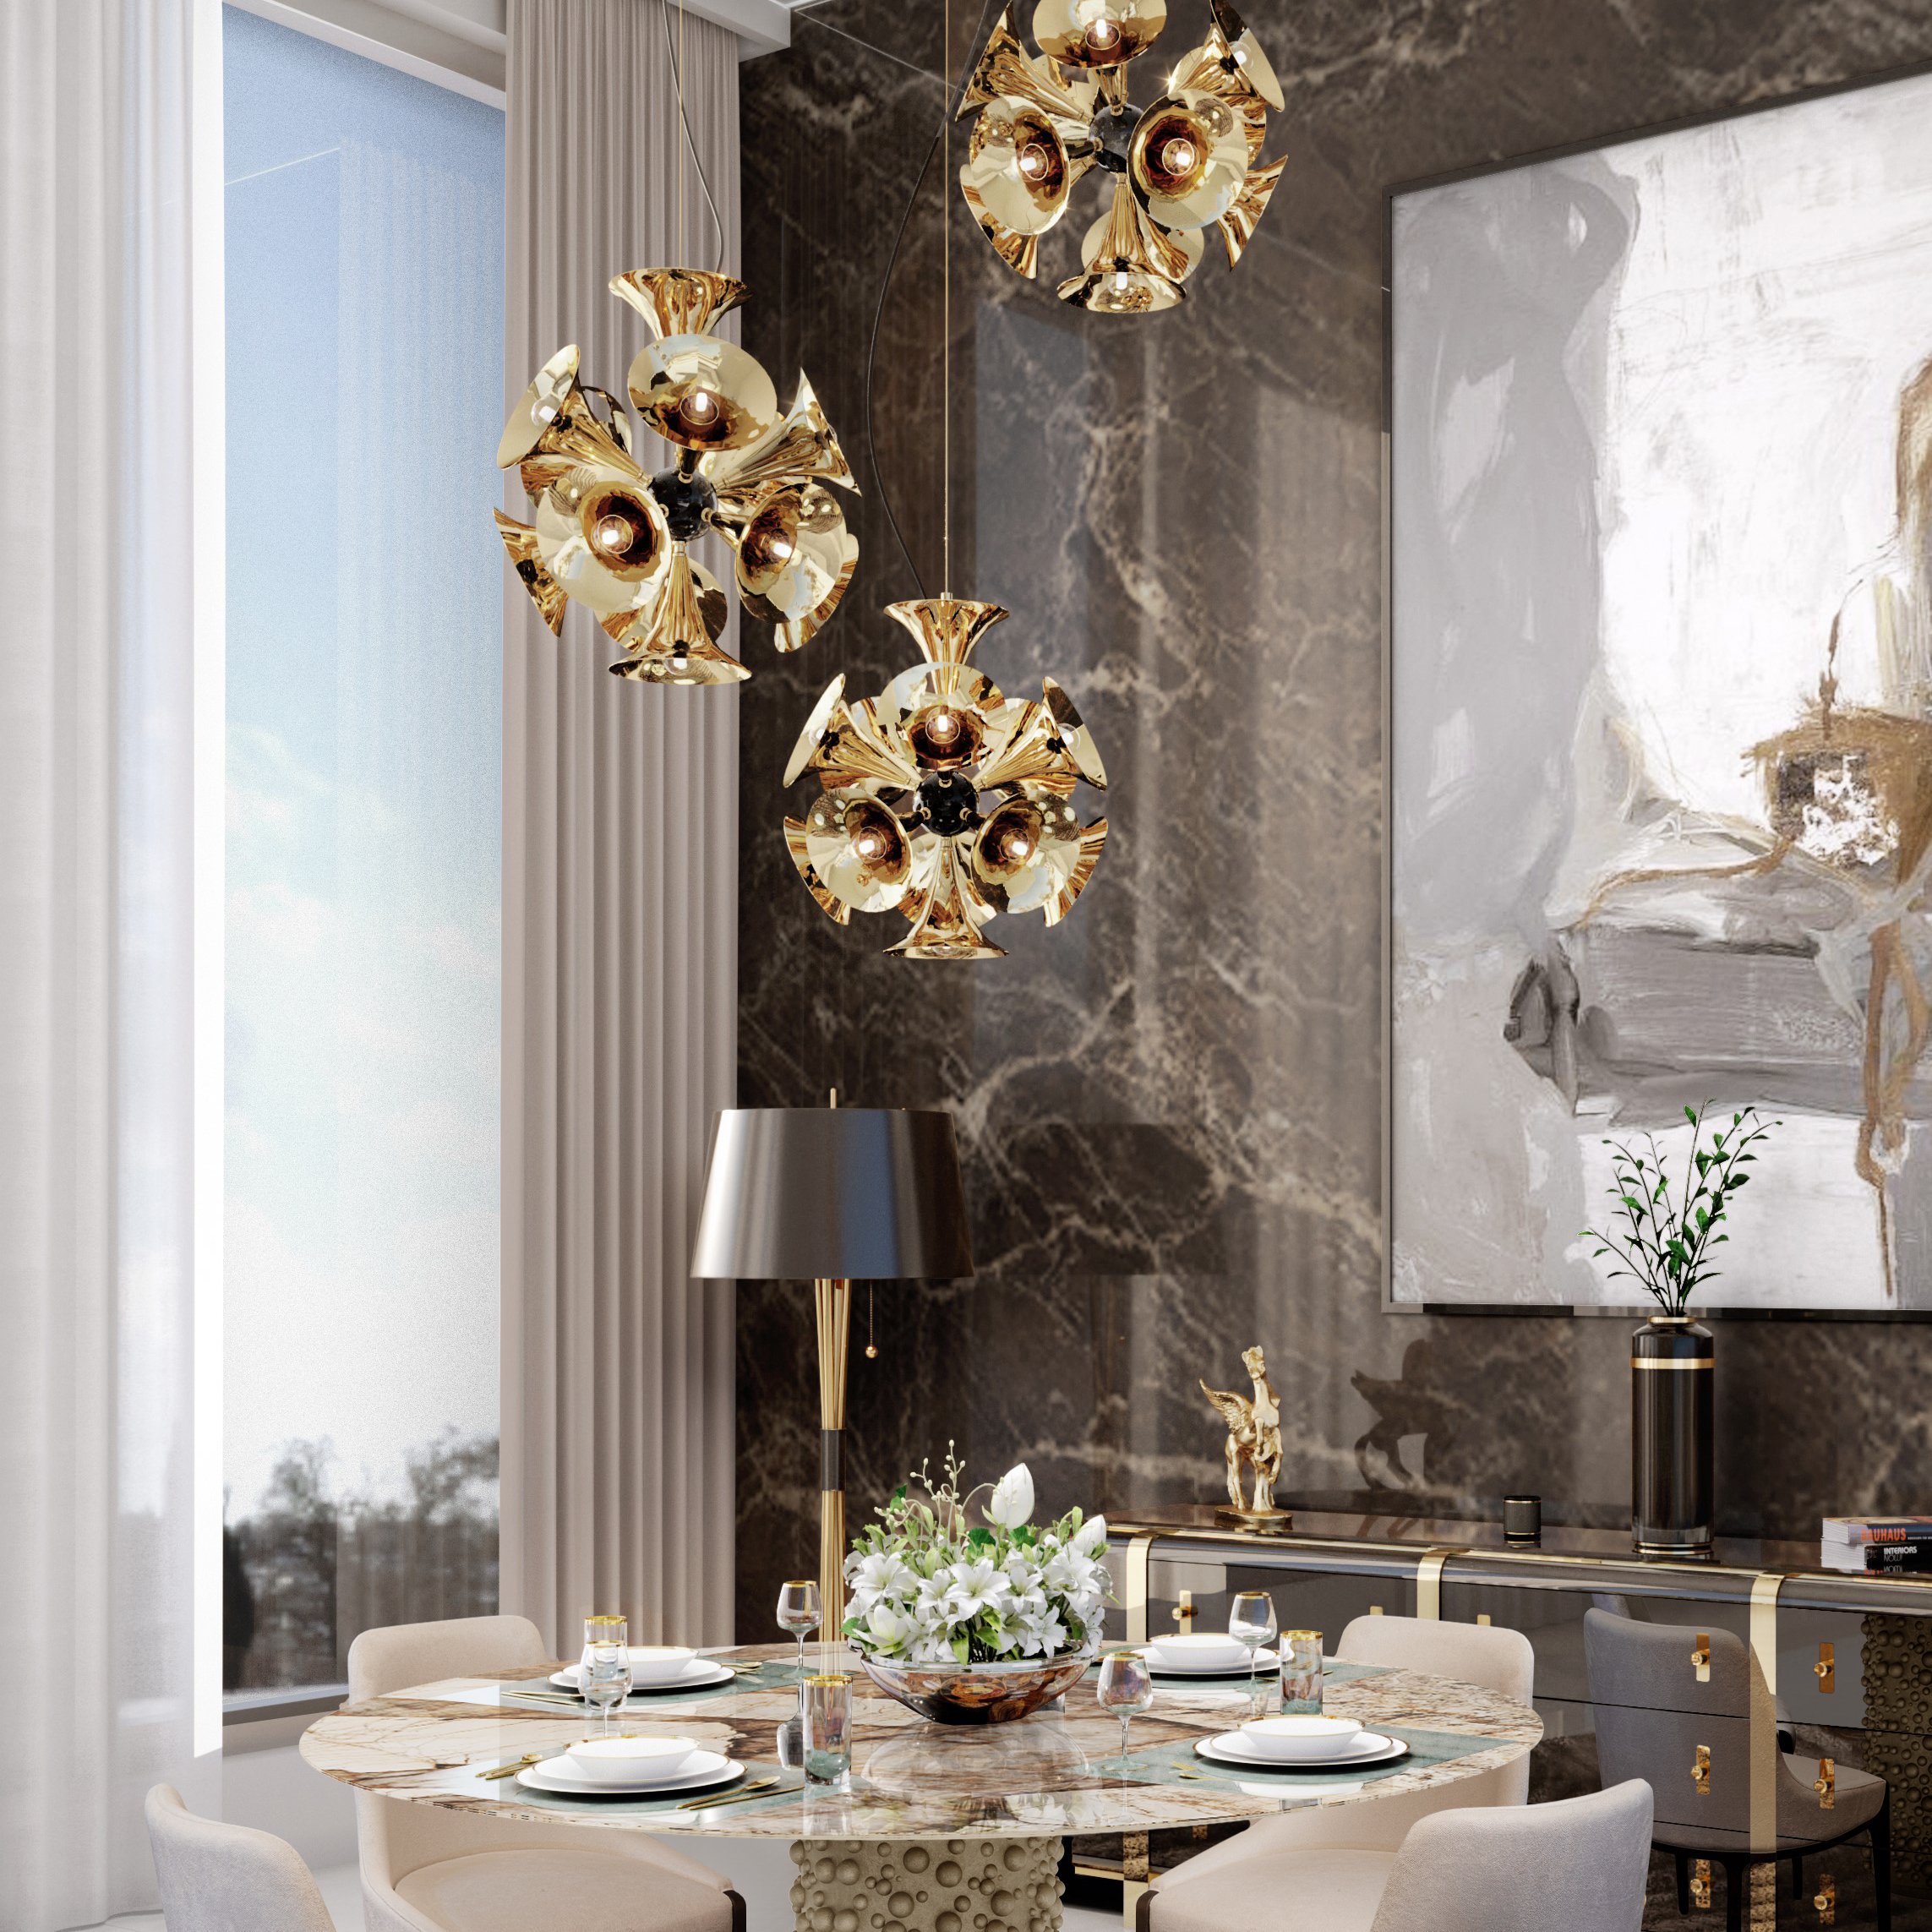 Radiant Illumination: The Beauty and Elegance of a Beads Chandelier